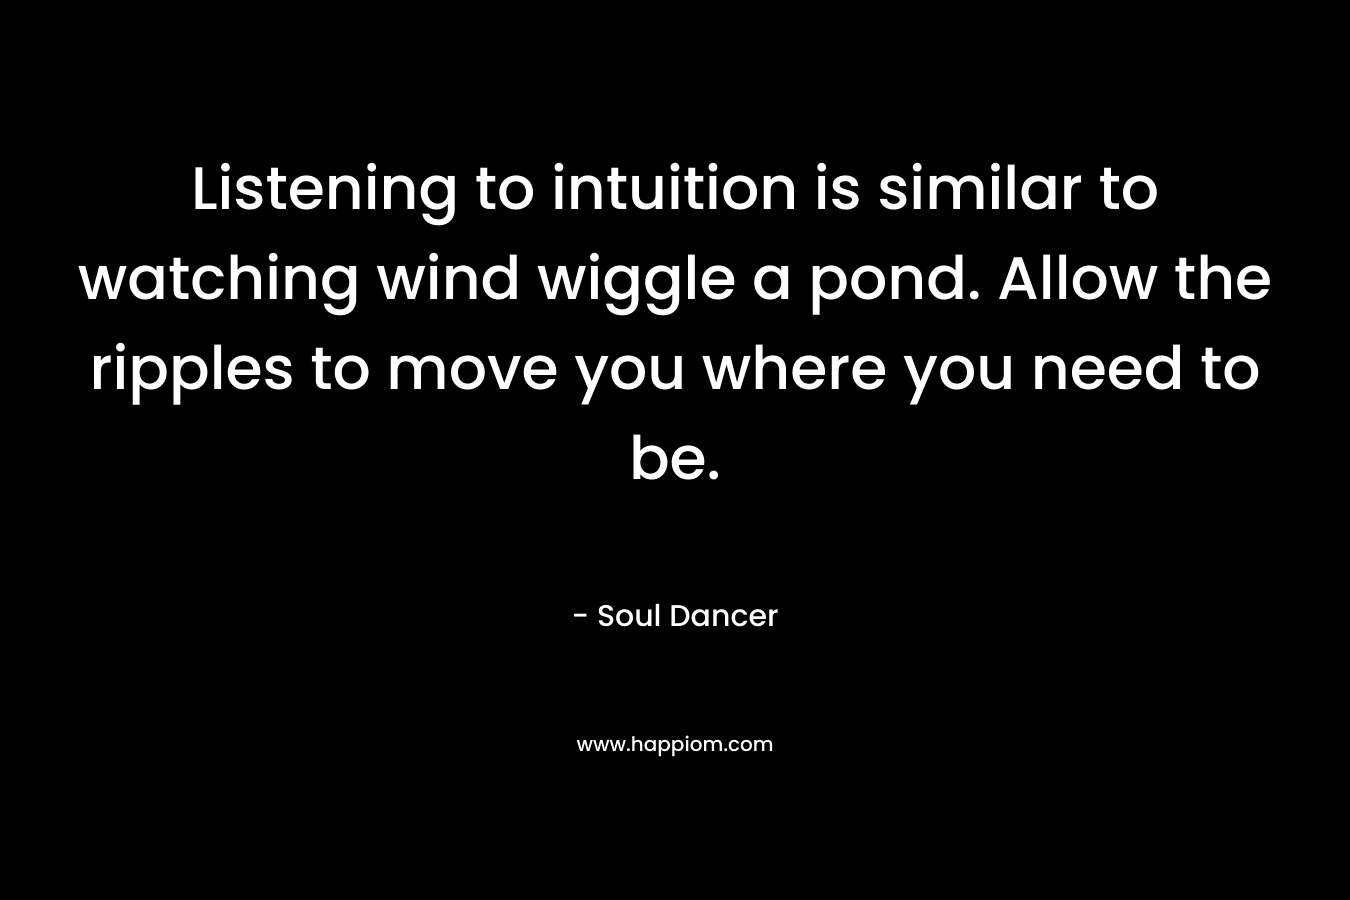 Listening to intuition is similar to watching wind wiggle a pond. Allow the ripples to move you where you need to be. – Soul Dancer